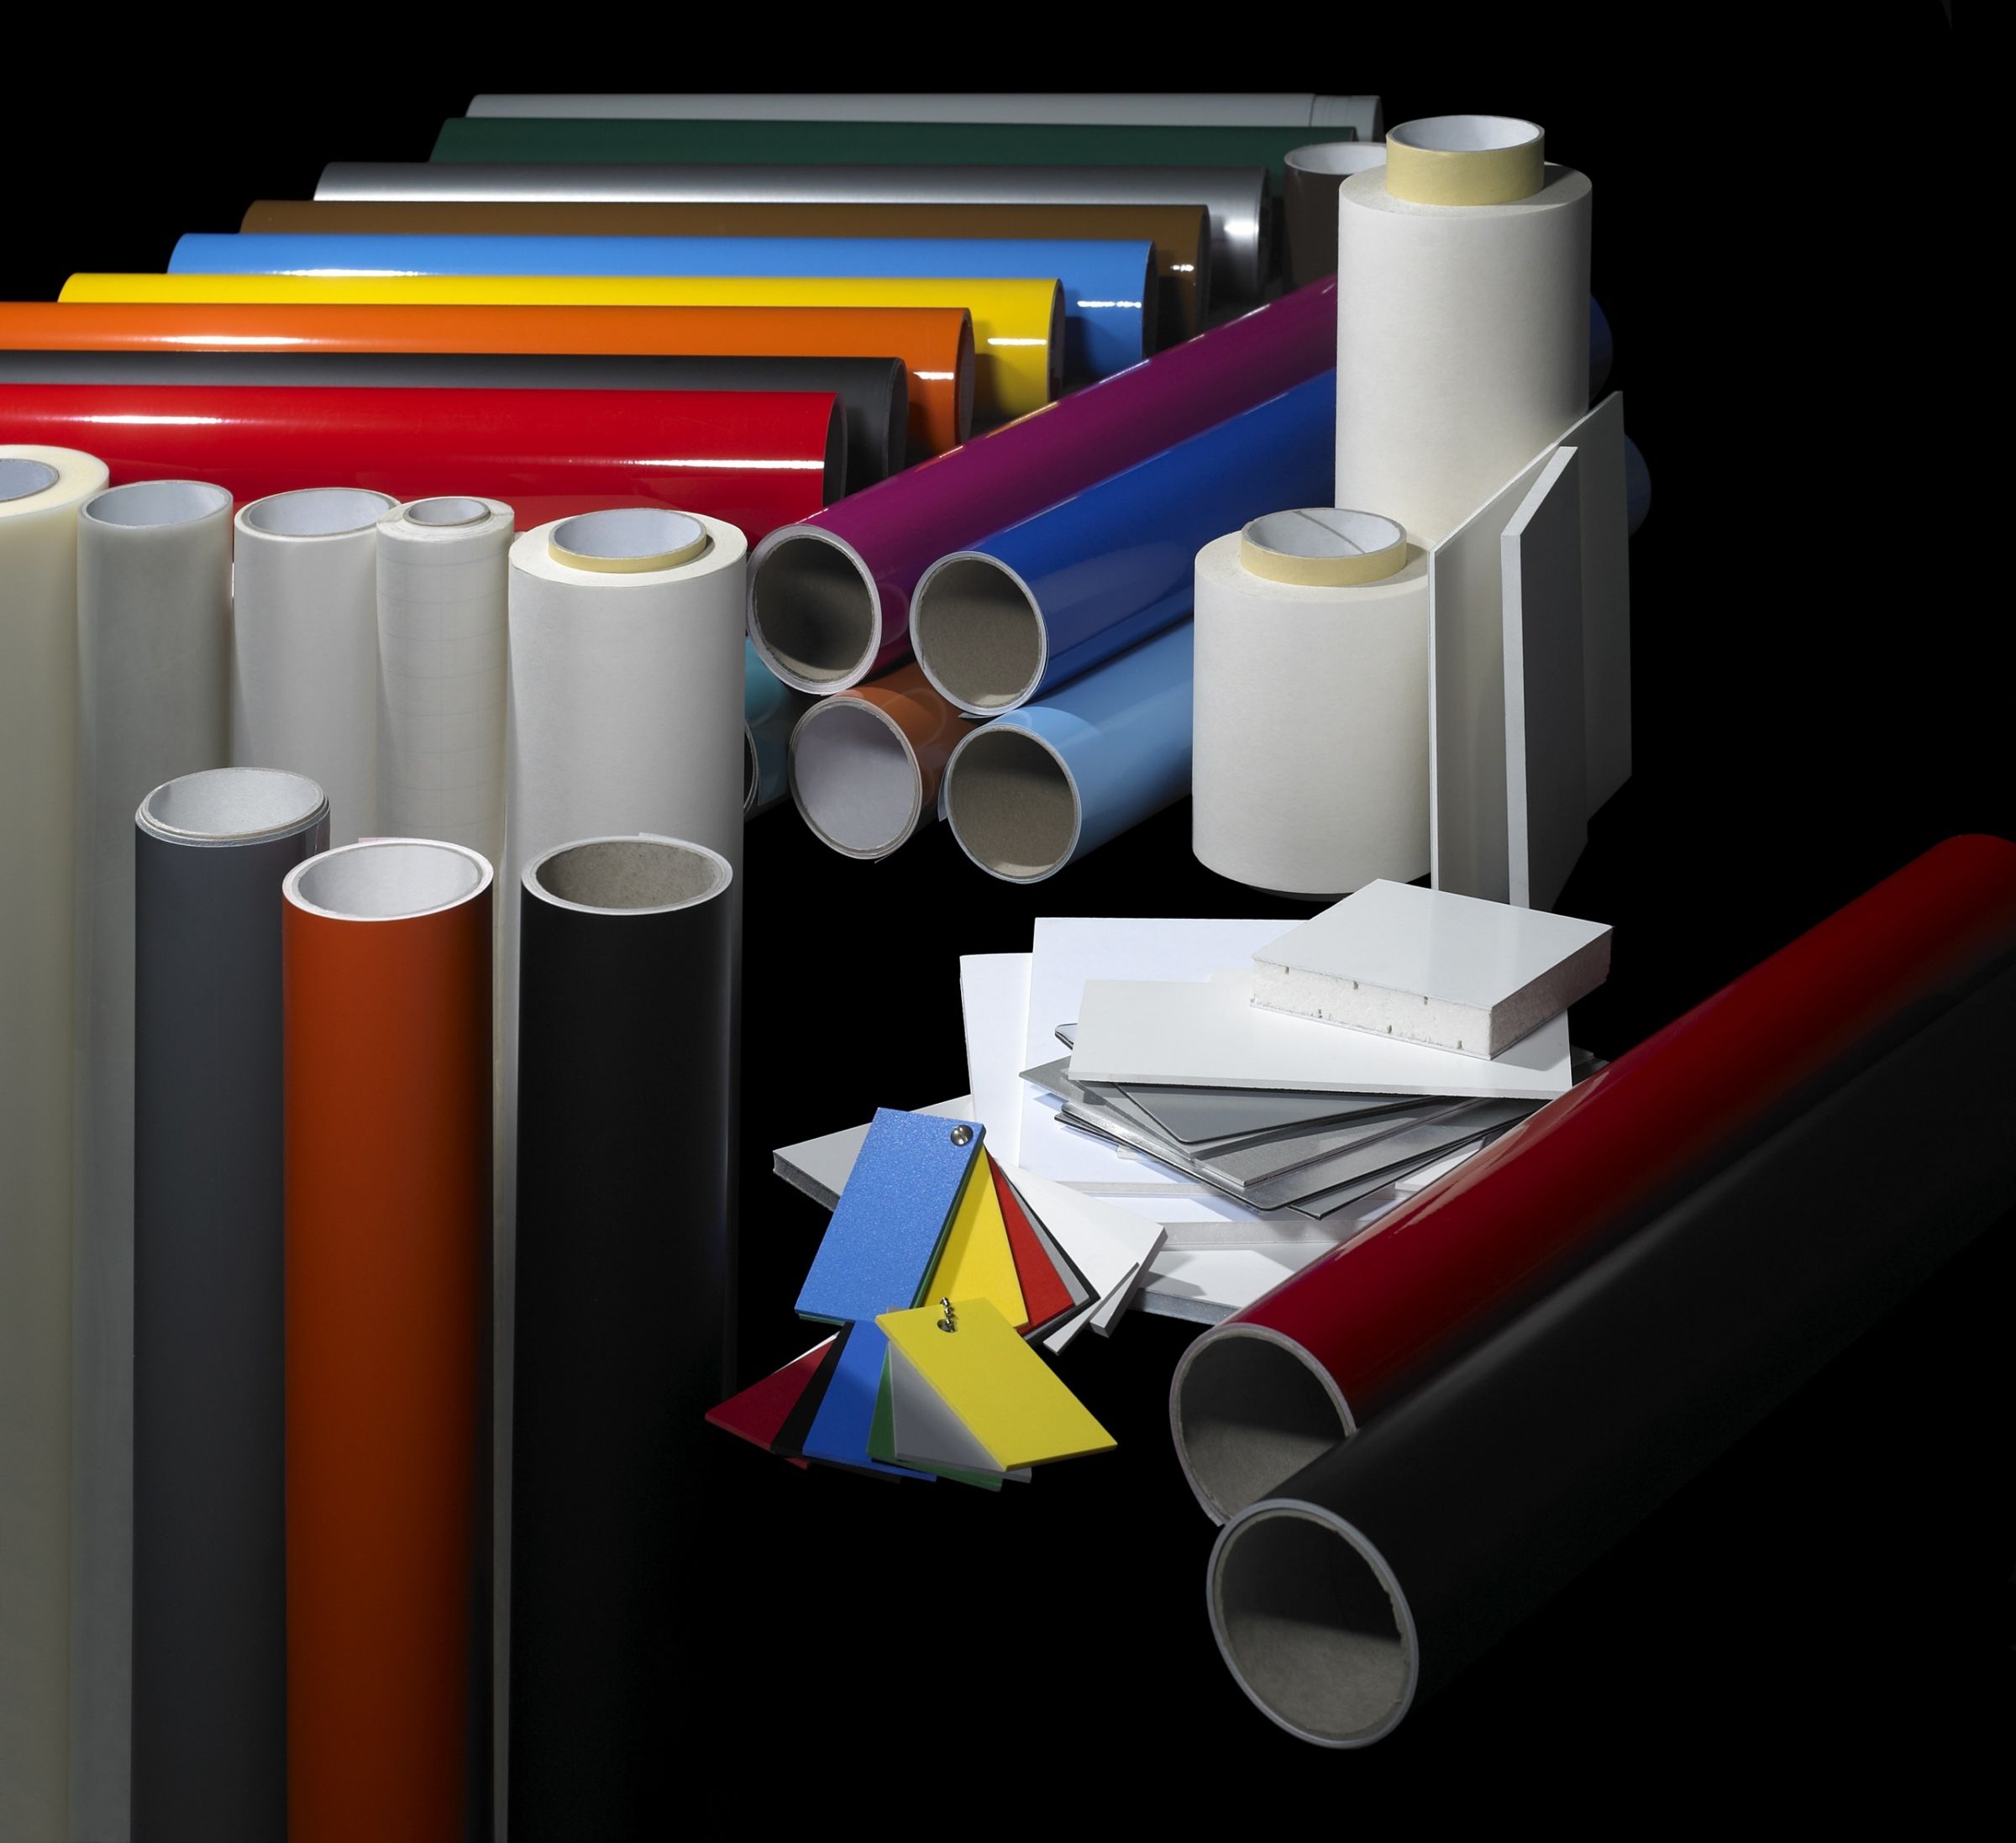 Self Adhesive Vinyl - Vinyl printing is a great promotional tool that  allows you to customize your message in a variety of colors and designs.  This type of advertising is ideal for